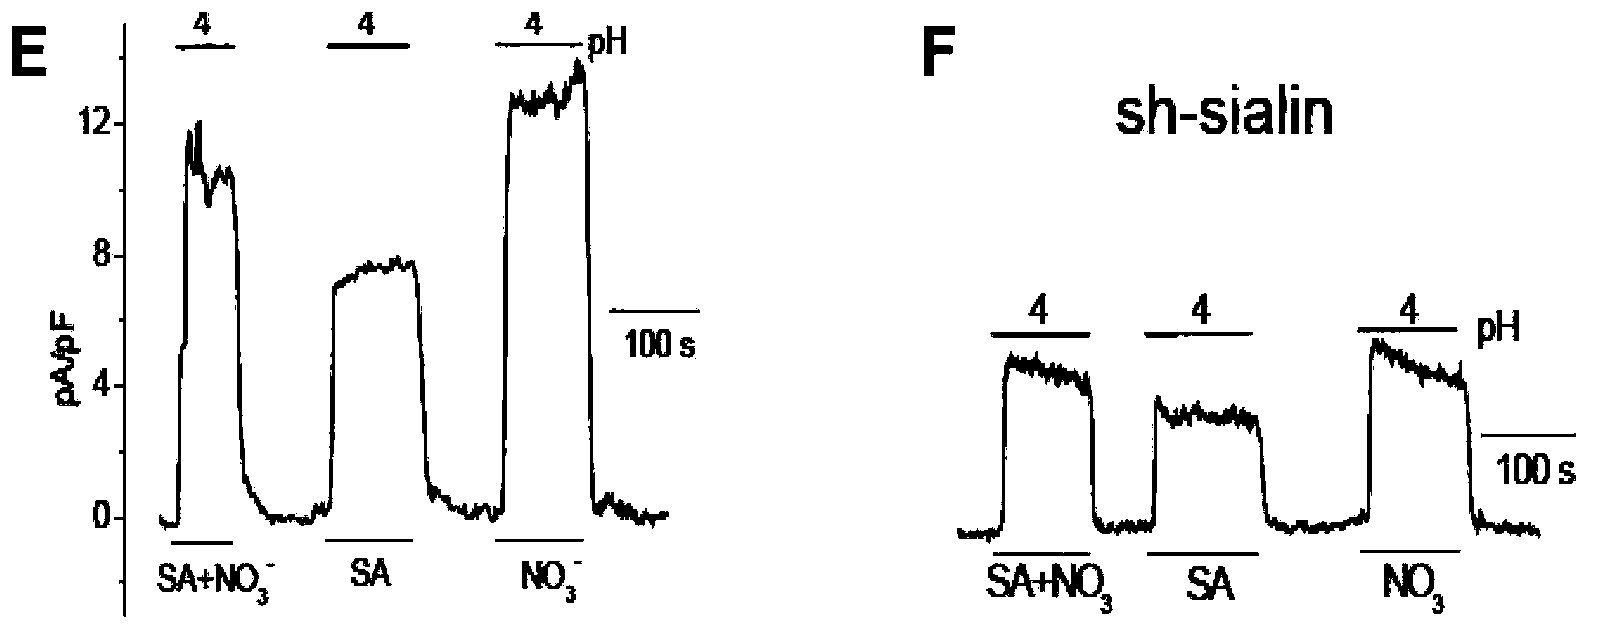 Use of SLC17A5 gene and coded protein thereof in preparing medicines for treating or diagnosing nitrate transfer or metabolic block or disorder related diseases